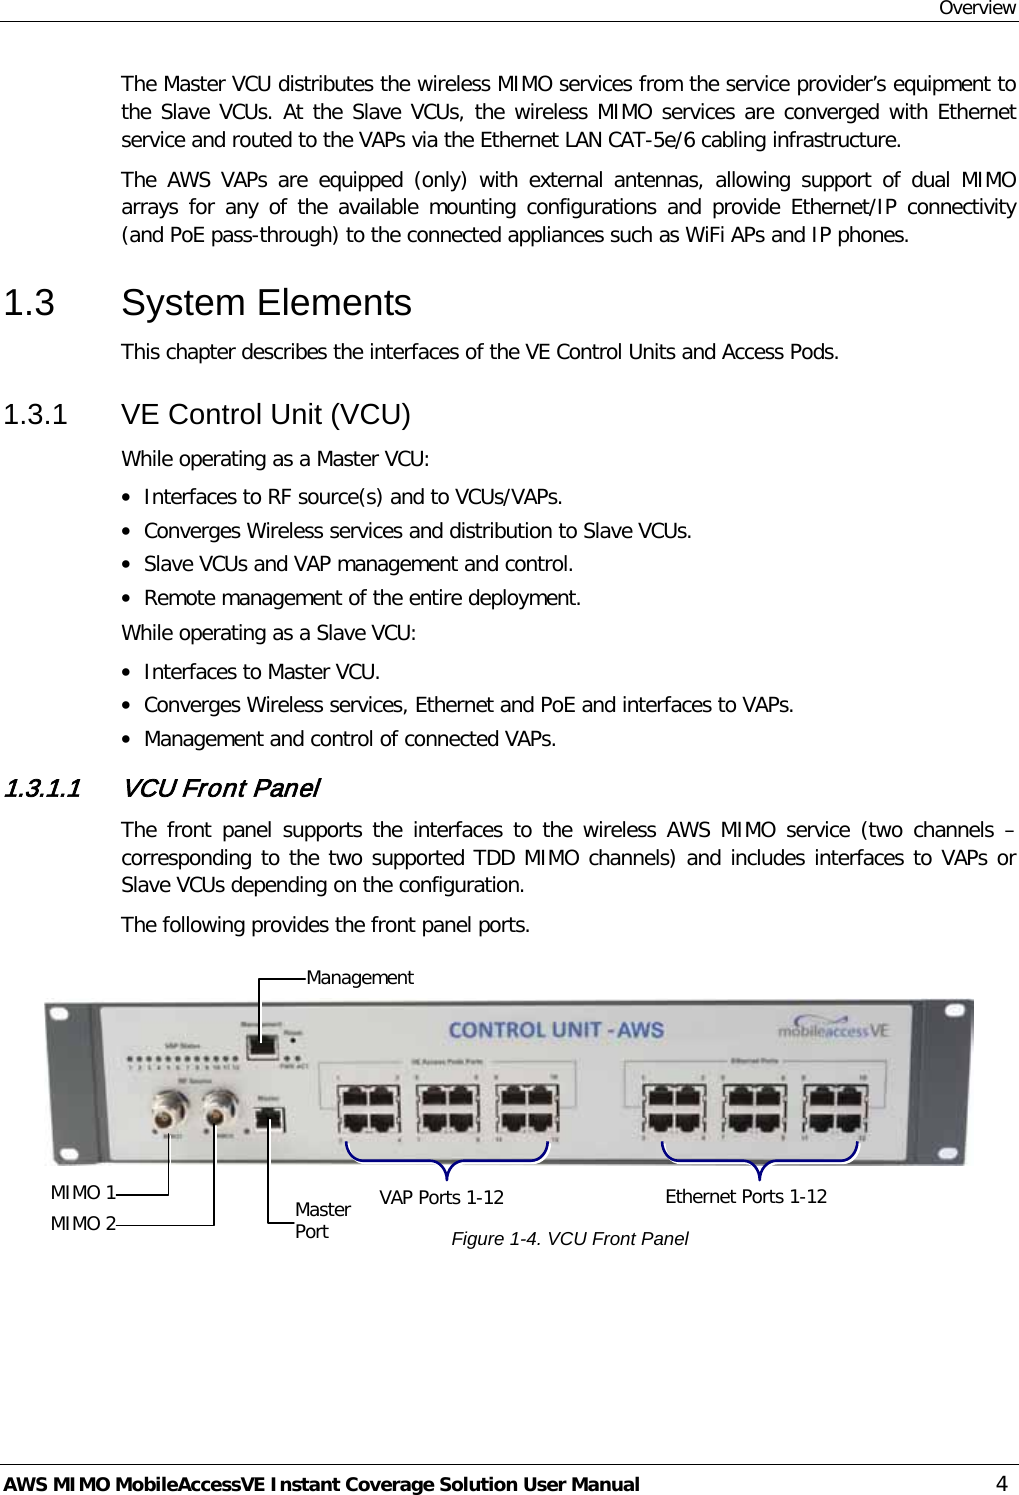 Overview AWS MIMO MobileAccessVE Instant Coverage Solution User Manual  4 The Master VCU distributes the wireless MIMO services from the service provider’s equipment to the Slave VCUs. At the Slave VCUs, the wireless MIMO services are converged with Ethernet service and routed to the VAPs via the Ethernet LAN CAT-5e/6 cabling infrastructure. The  AWS VAPs are equipped (only) with external antennas, allowing support of dual MIMO arrays for any of the available mounting configurations and provide Ethernet/IP connectivity (and PoE pass-through) to the connected appliances such as WiFi APs and IP phones. 1.3  System Elements This chapter describes the interfaces of the VE Control Units and Access Pods.  1.3.1  VE Control Unit (VCU) While operating as a Master VCU: • Interfaces to RF source(s) and to VCUs/VAPs. • Converges Wireless services and distribution to Slave VCUs. • Slave VCUs and VAP management and control. • Remote management of the entire deployment. While operating as a Slave VCU: • Interfaces to Master VCU. • Converges Wireless services, Ethernet and PoE and interfaces to VAPs. • Management and control of connected VAPs. 1.3.1.1 VCU Front Panel The front panel supports the interfaces to the wireless AWS MIMO service (two channels – corresponding to the two supported TDD MIMO channels) and includes interfaces to VAPs or Slave VCUs depending on the configuration. The following provides the front panel ports.        Figure  1-4. VCU Front Panel Ethernet Ports 1-12 VAP Ports 1-12 Management  MIMO 2   MIMO 1   Master Port   